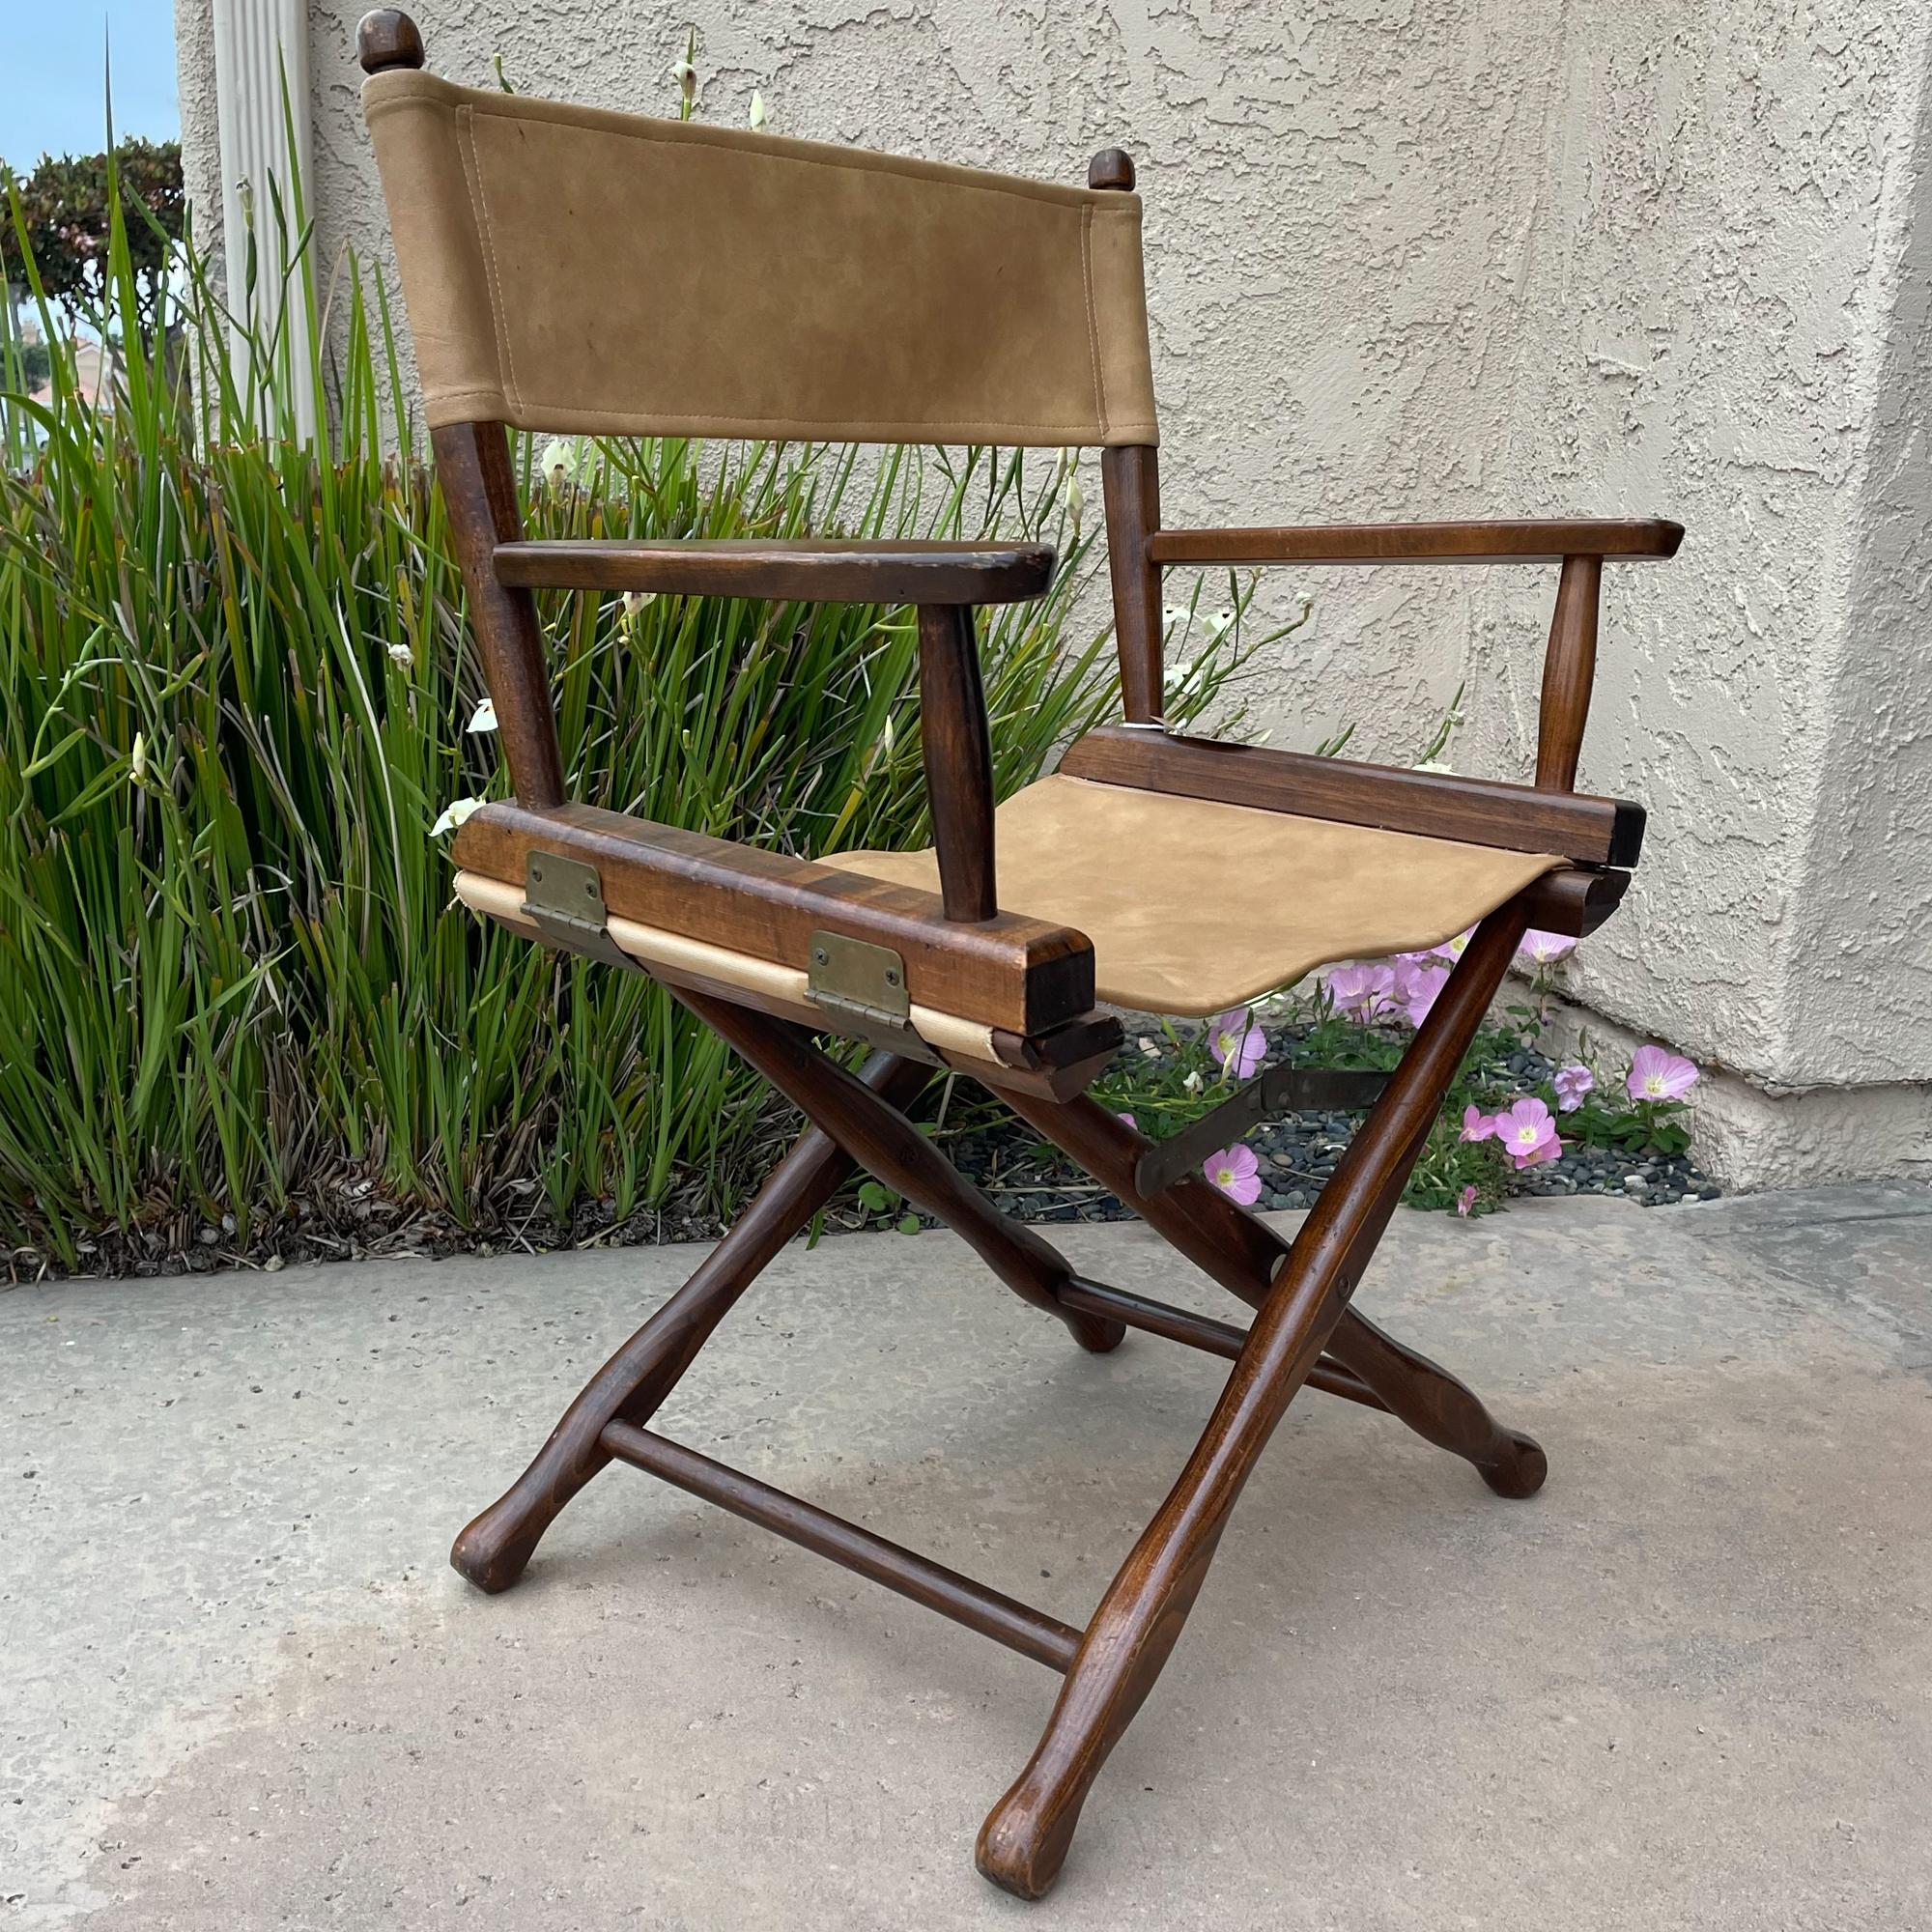 1960s DIRECTORS Chair Gold Medal Camp Folding Furniture Racine WI 1